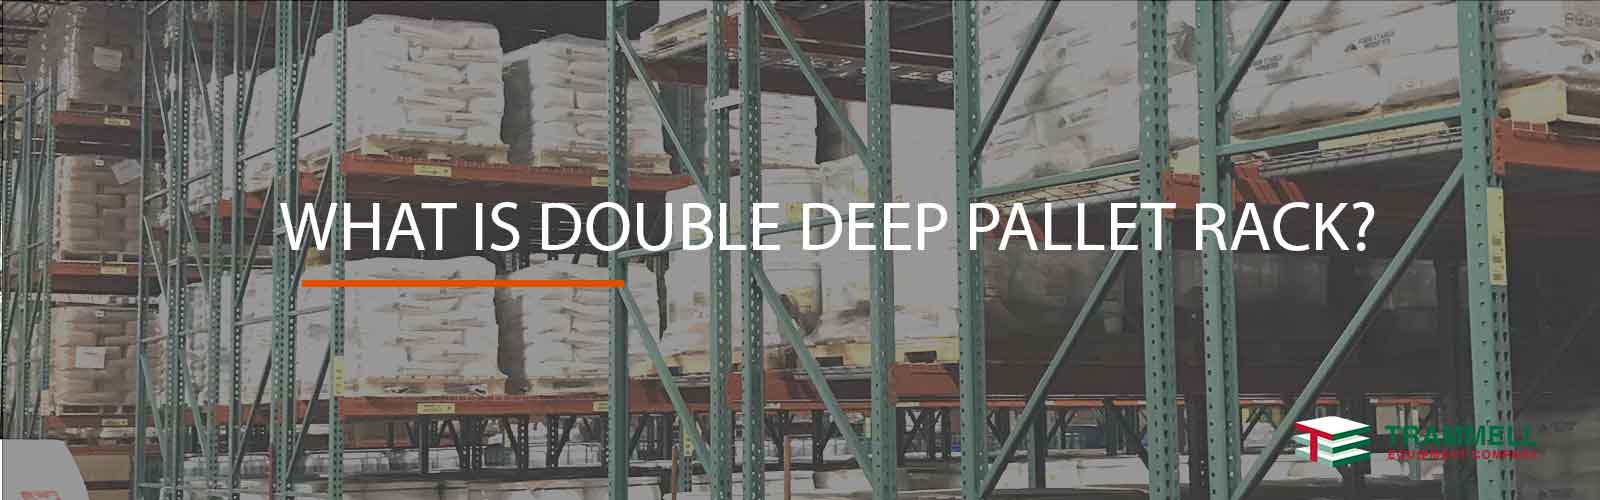 What is double deep pallet racking?